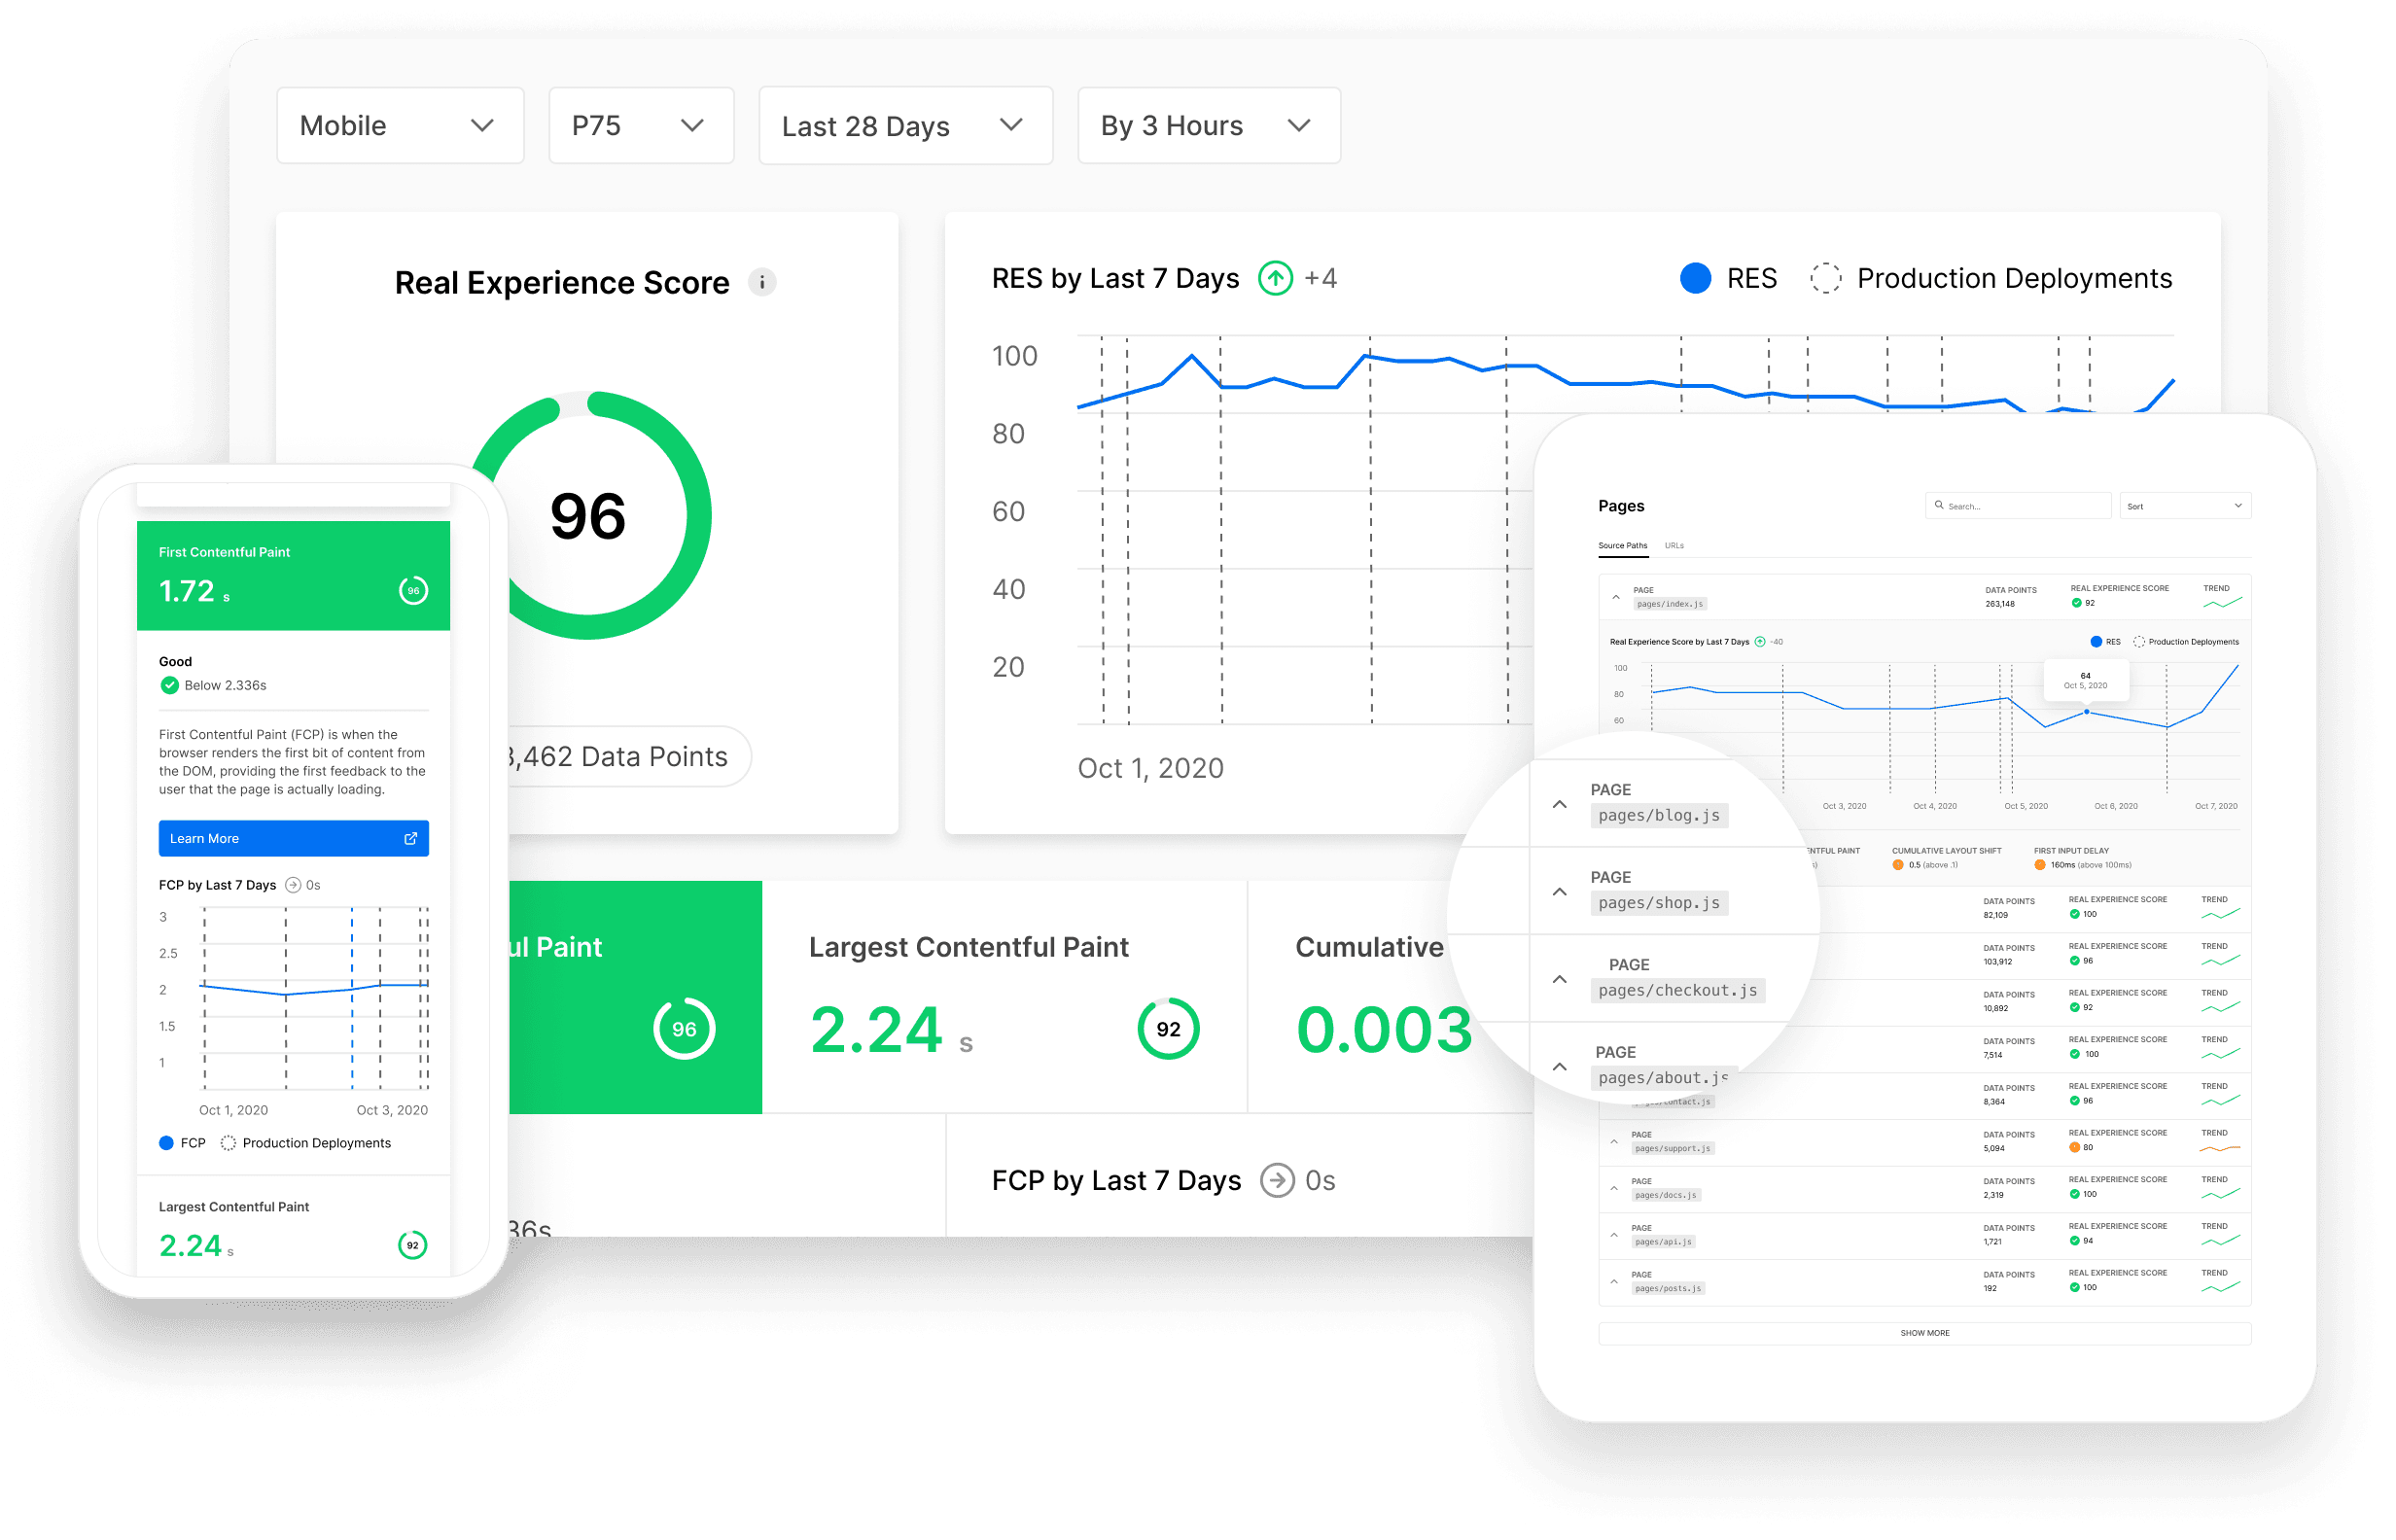 Preview screenshot of Vercel Speed Insights dashboard with Real Experience Score of 97